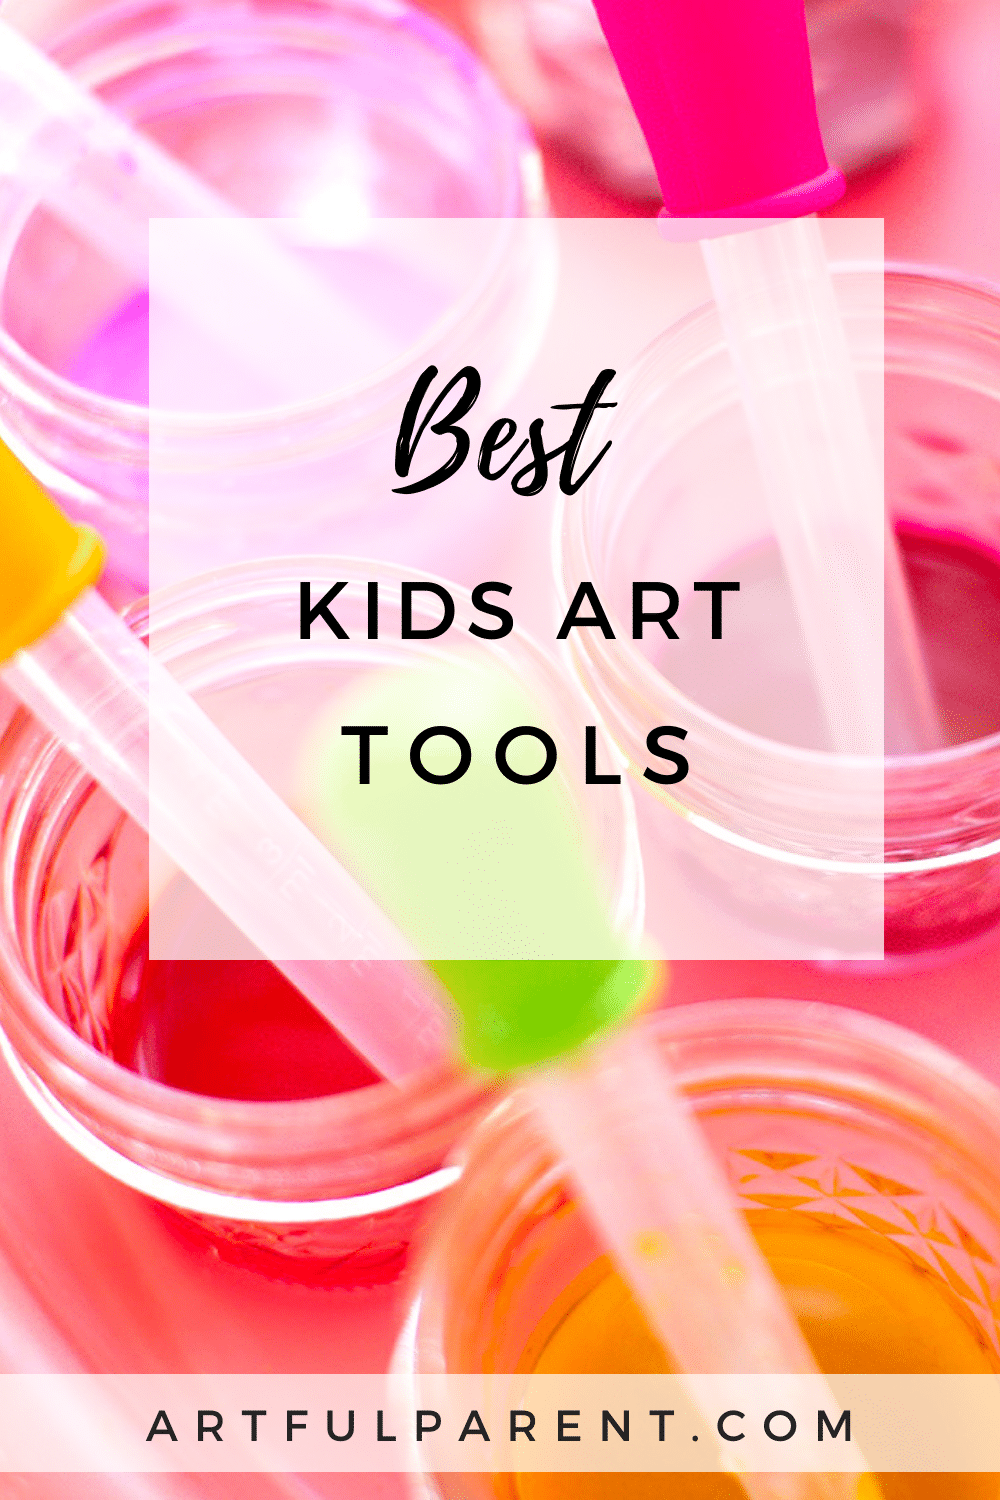 The Best Art Tools for Kids